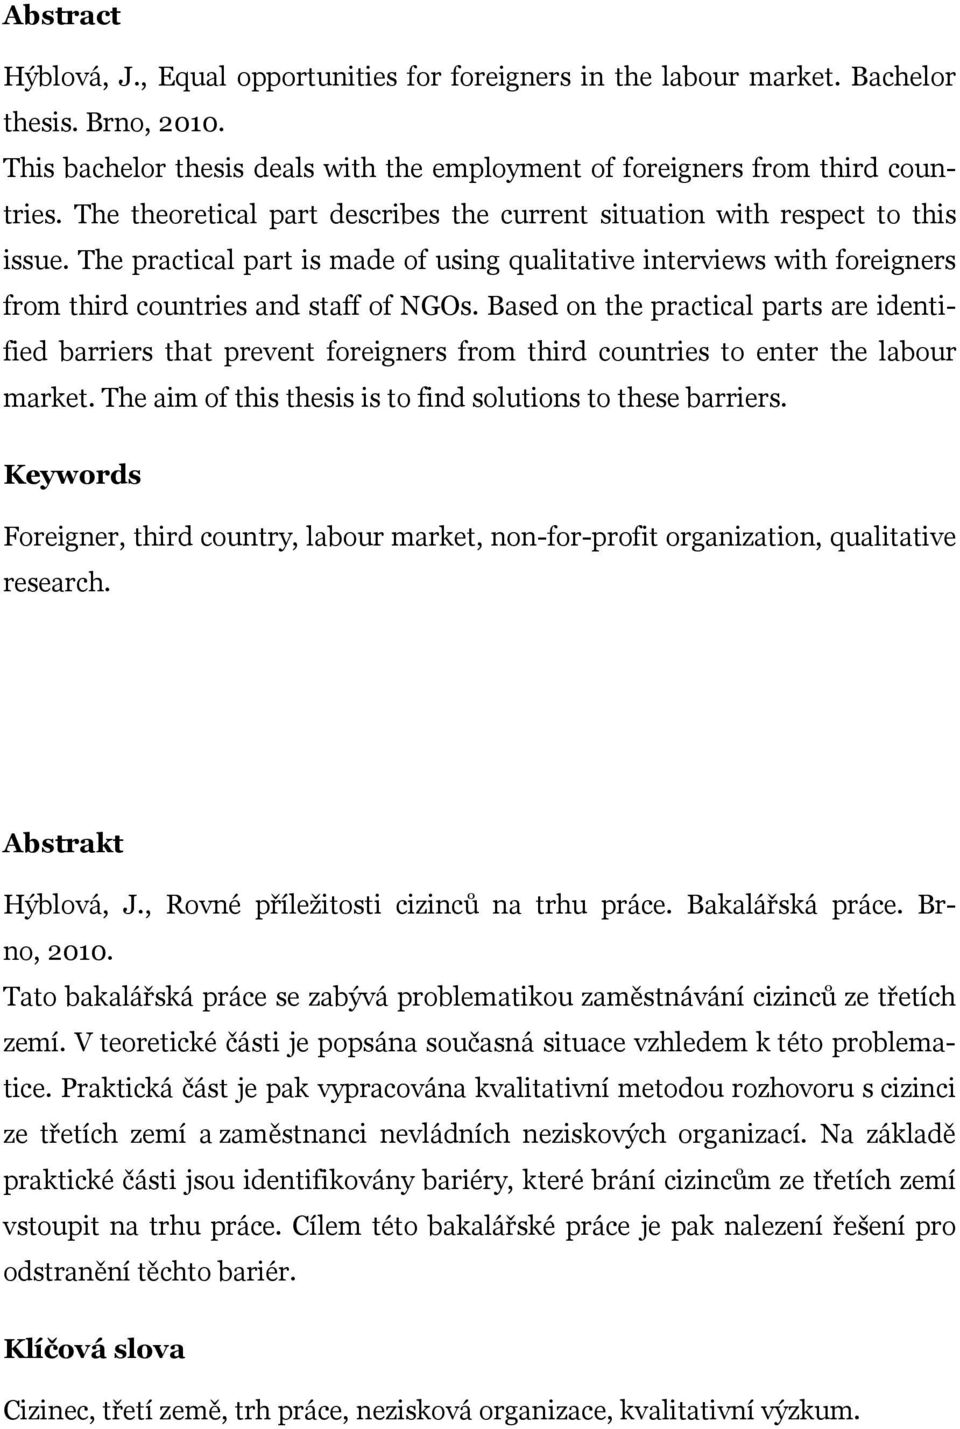 Based on the practical parts are identified barriers that prevent foreigners from third countries to enter the labour market. The aim of this thesis is to find solutions to these barriers.